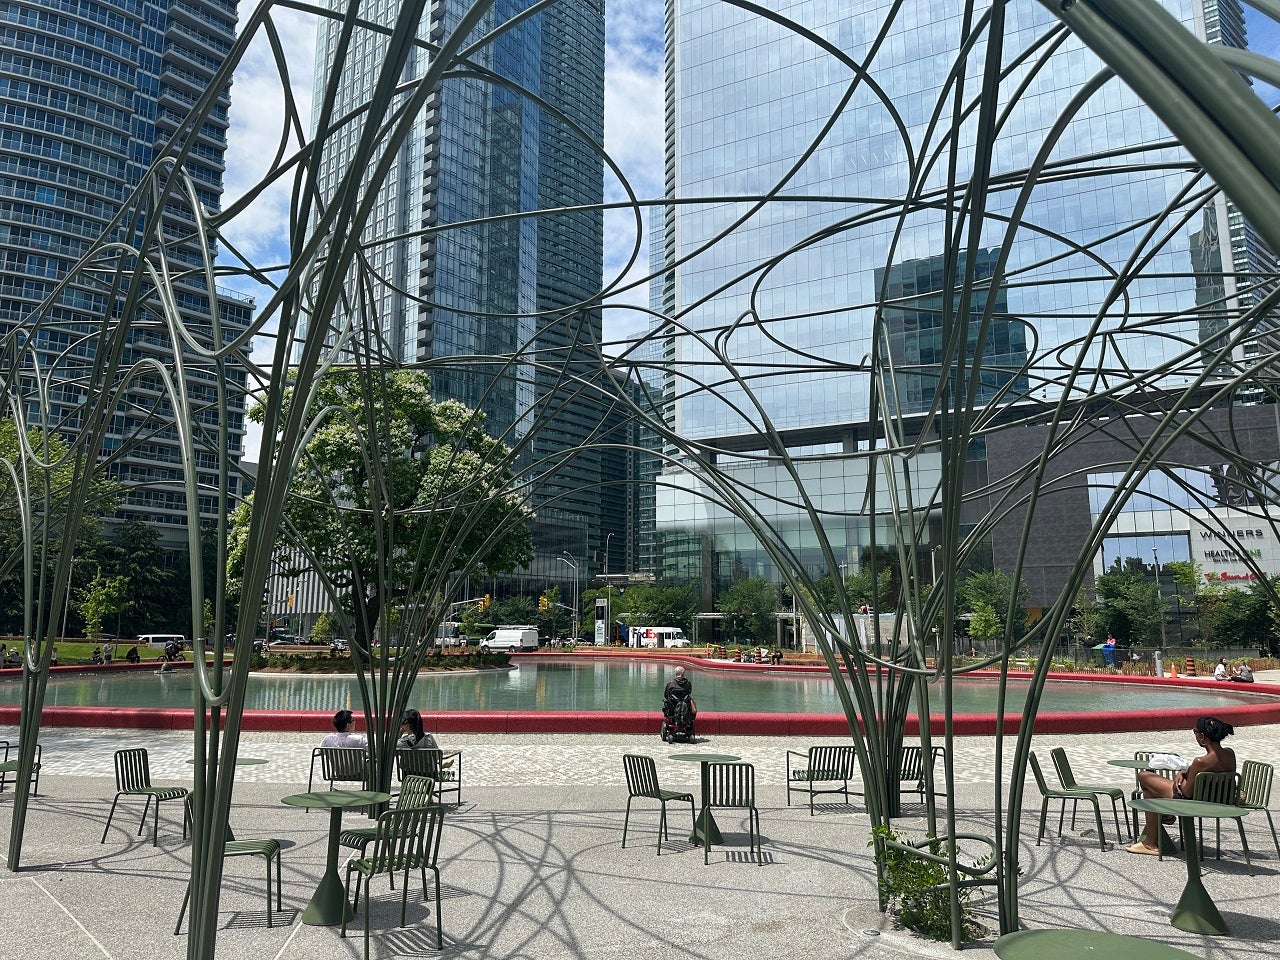 close-up of a trellis feature and tables and chairs in an urban park